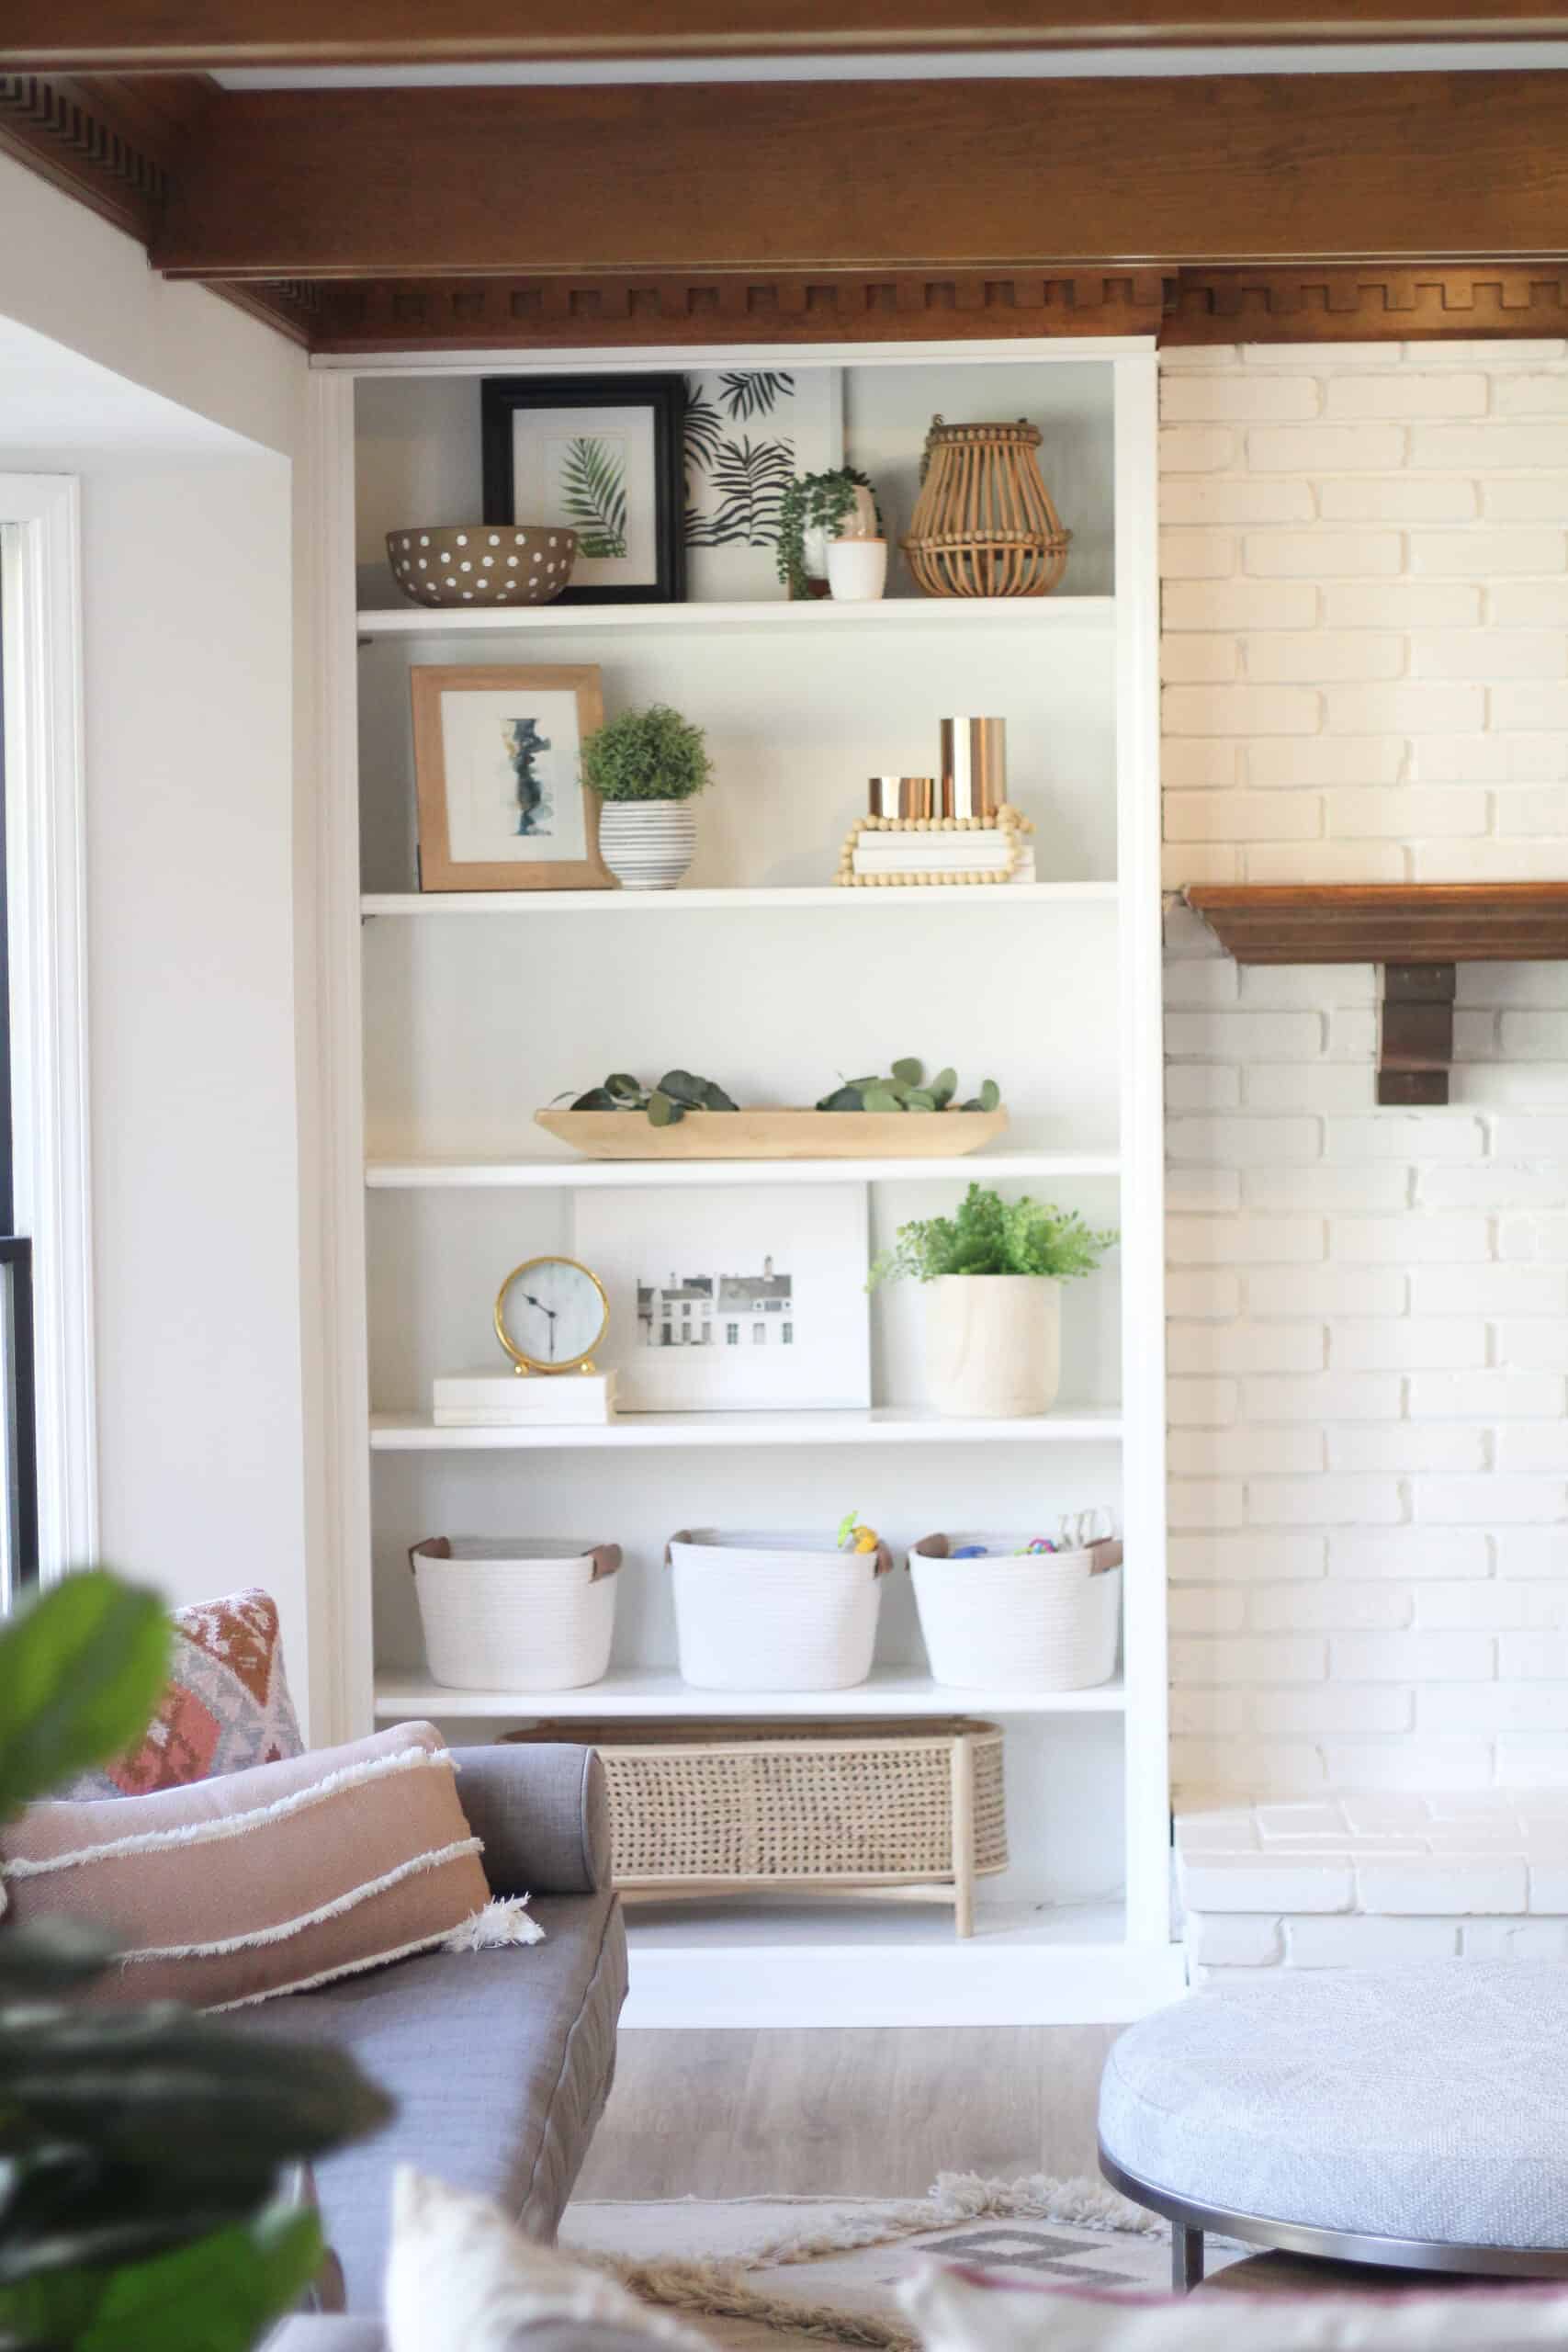 How to decorate shelving